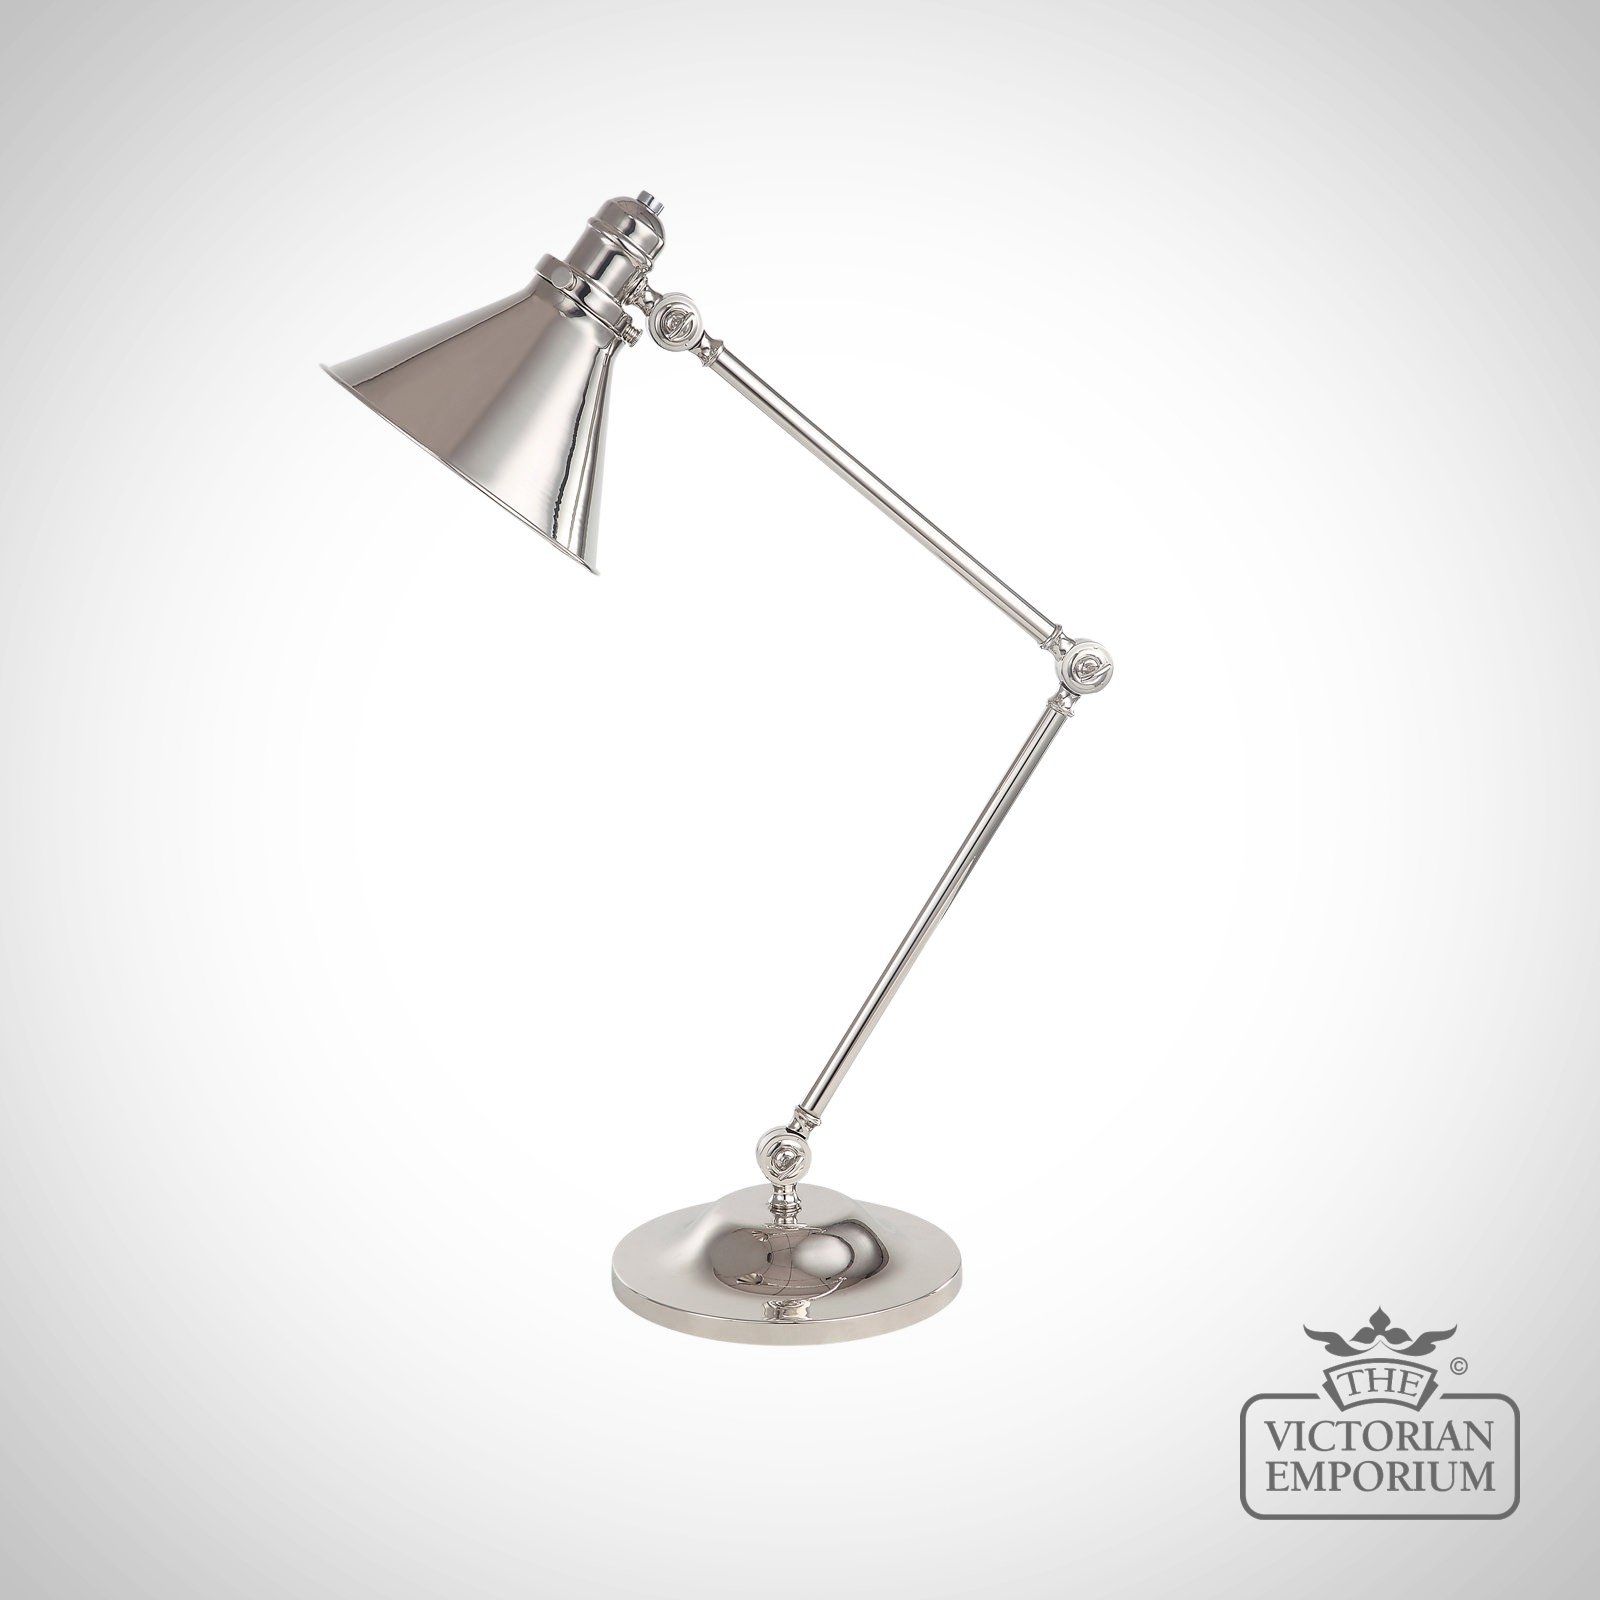 Provence table lamp in Polished Nickel